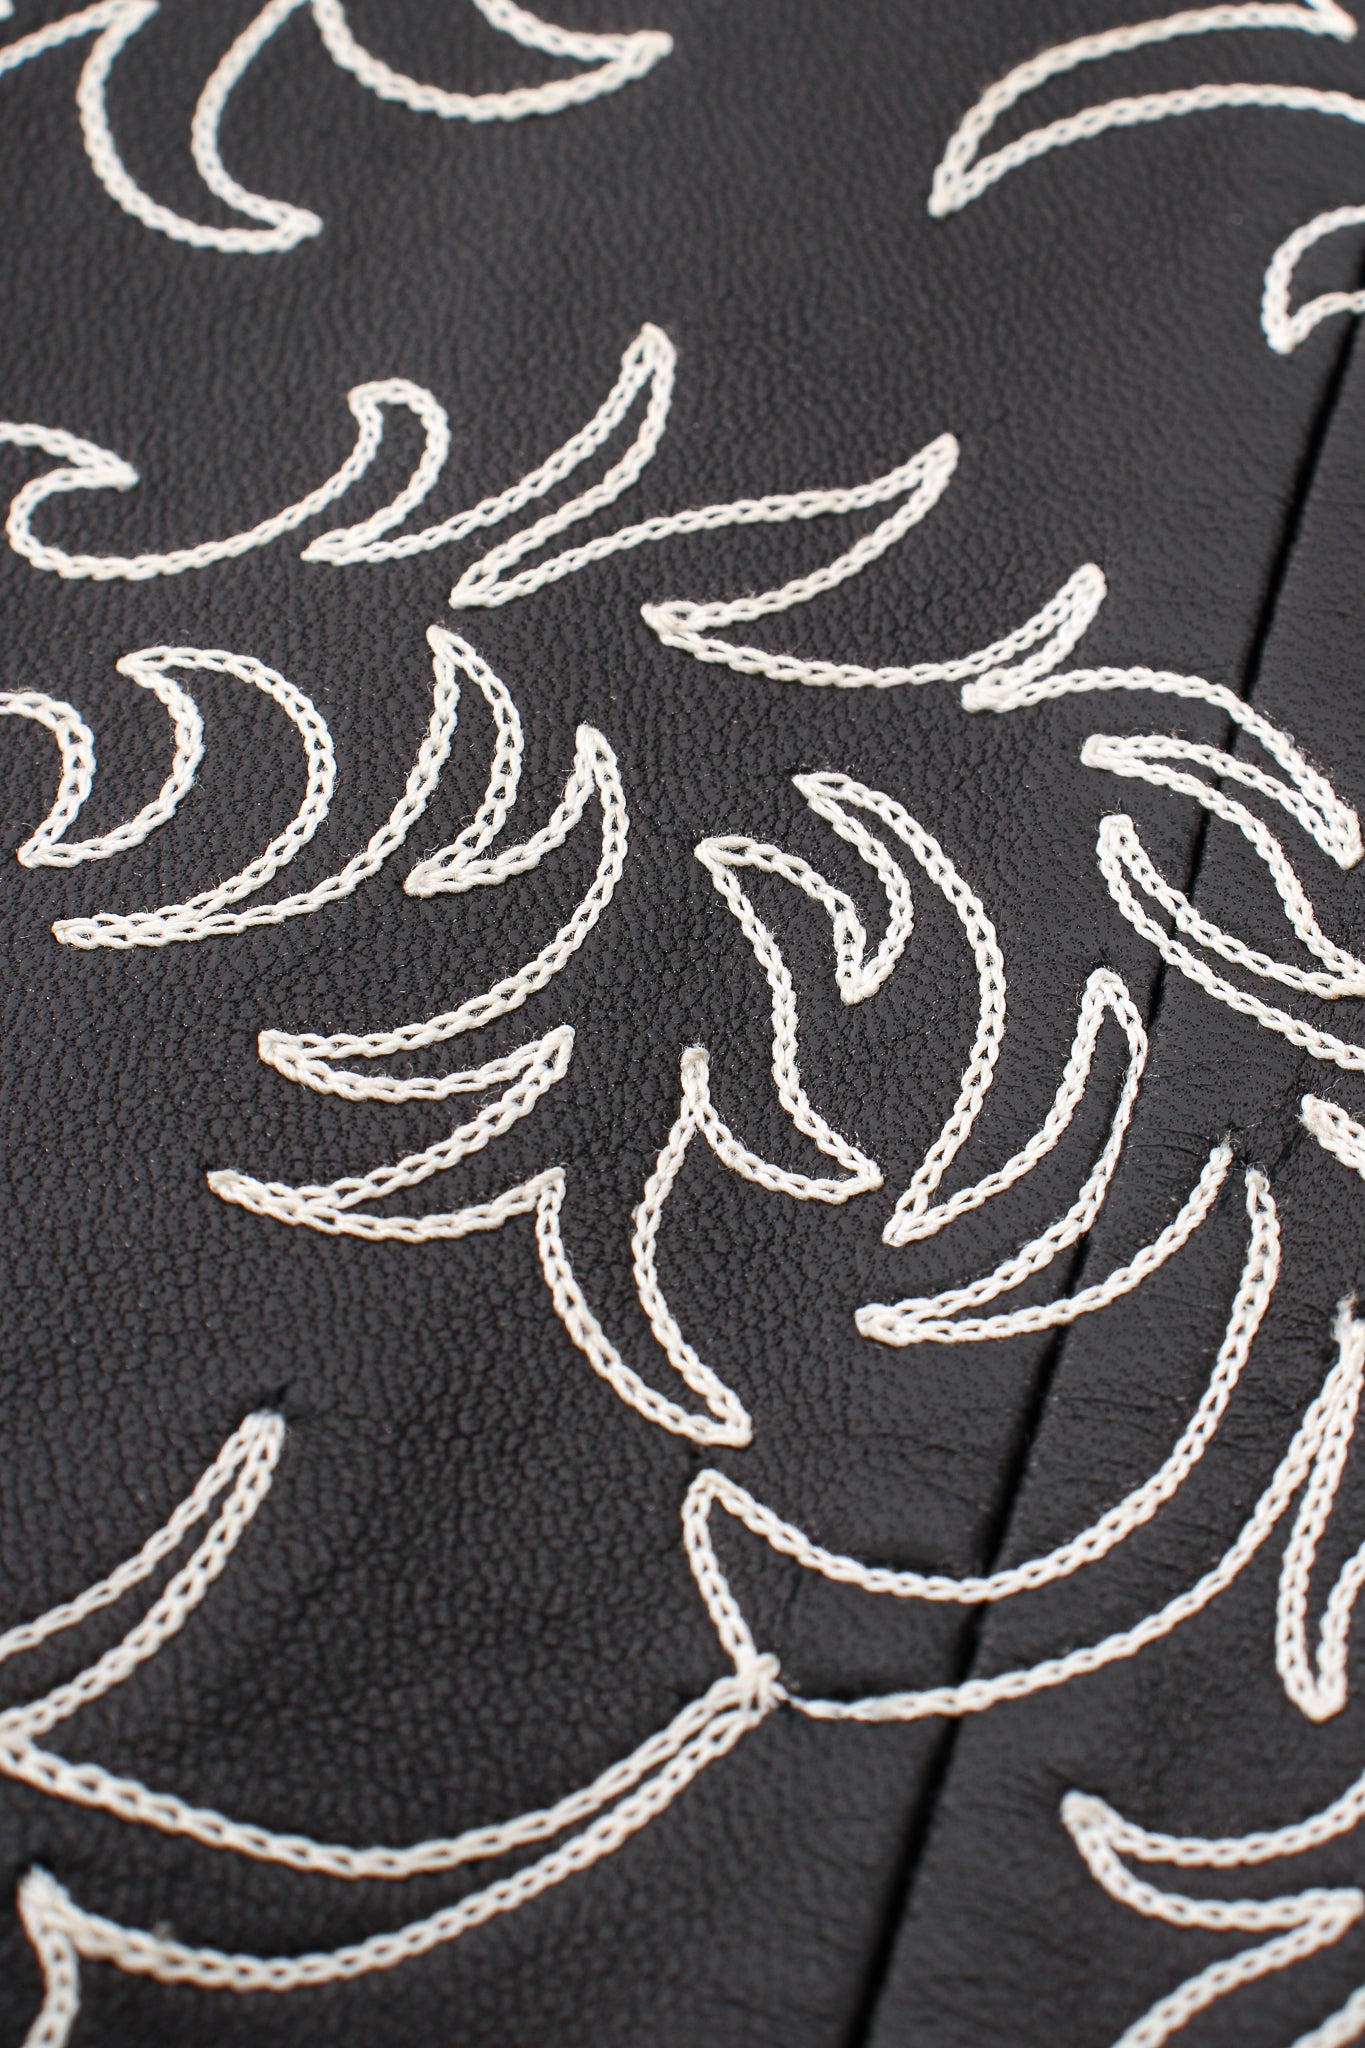 Vintage Jean Claude Jitrois Embroidered Collarless Leather Jacket embroidery detail at Recess LA